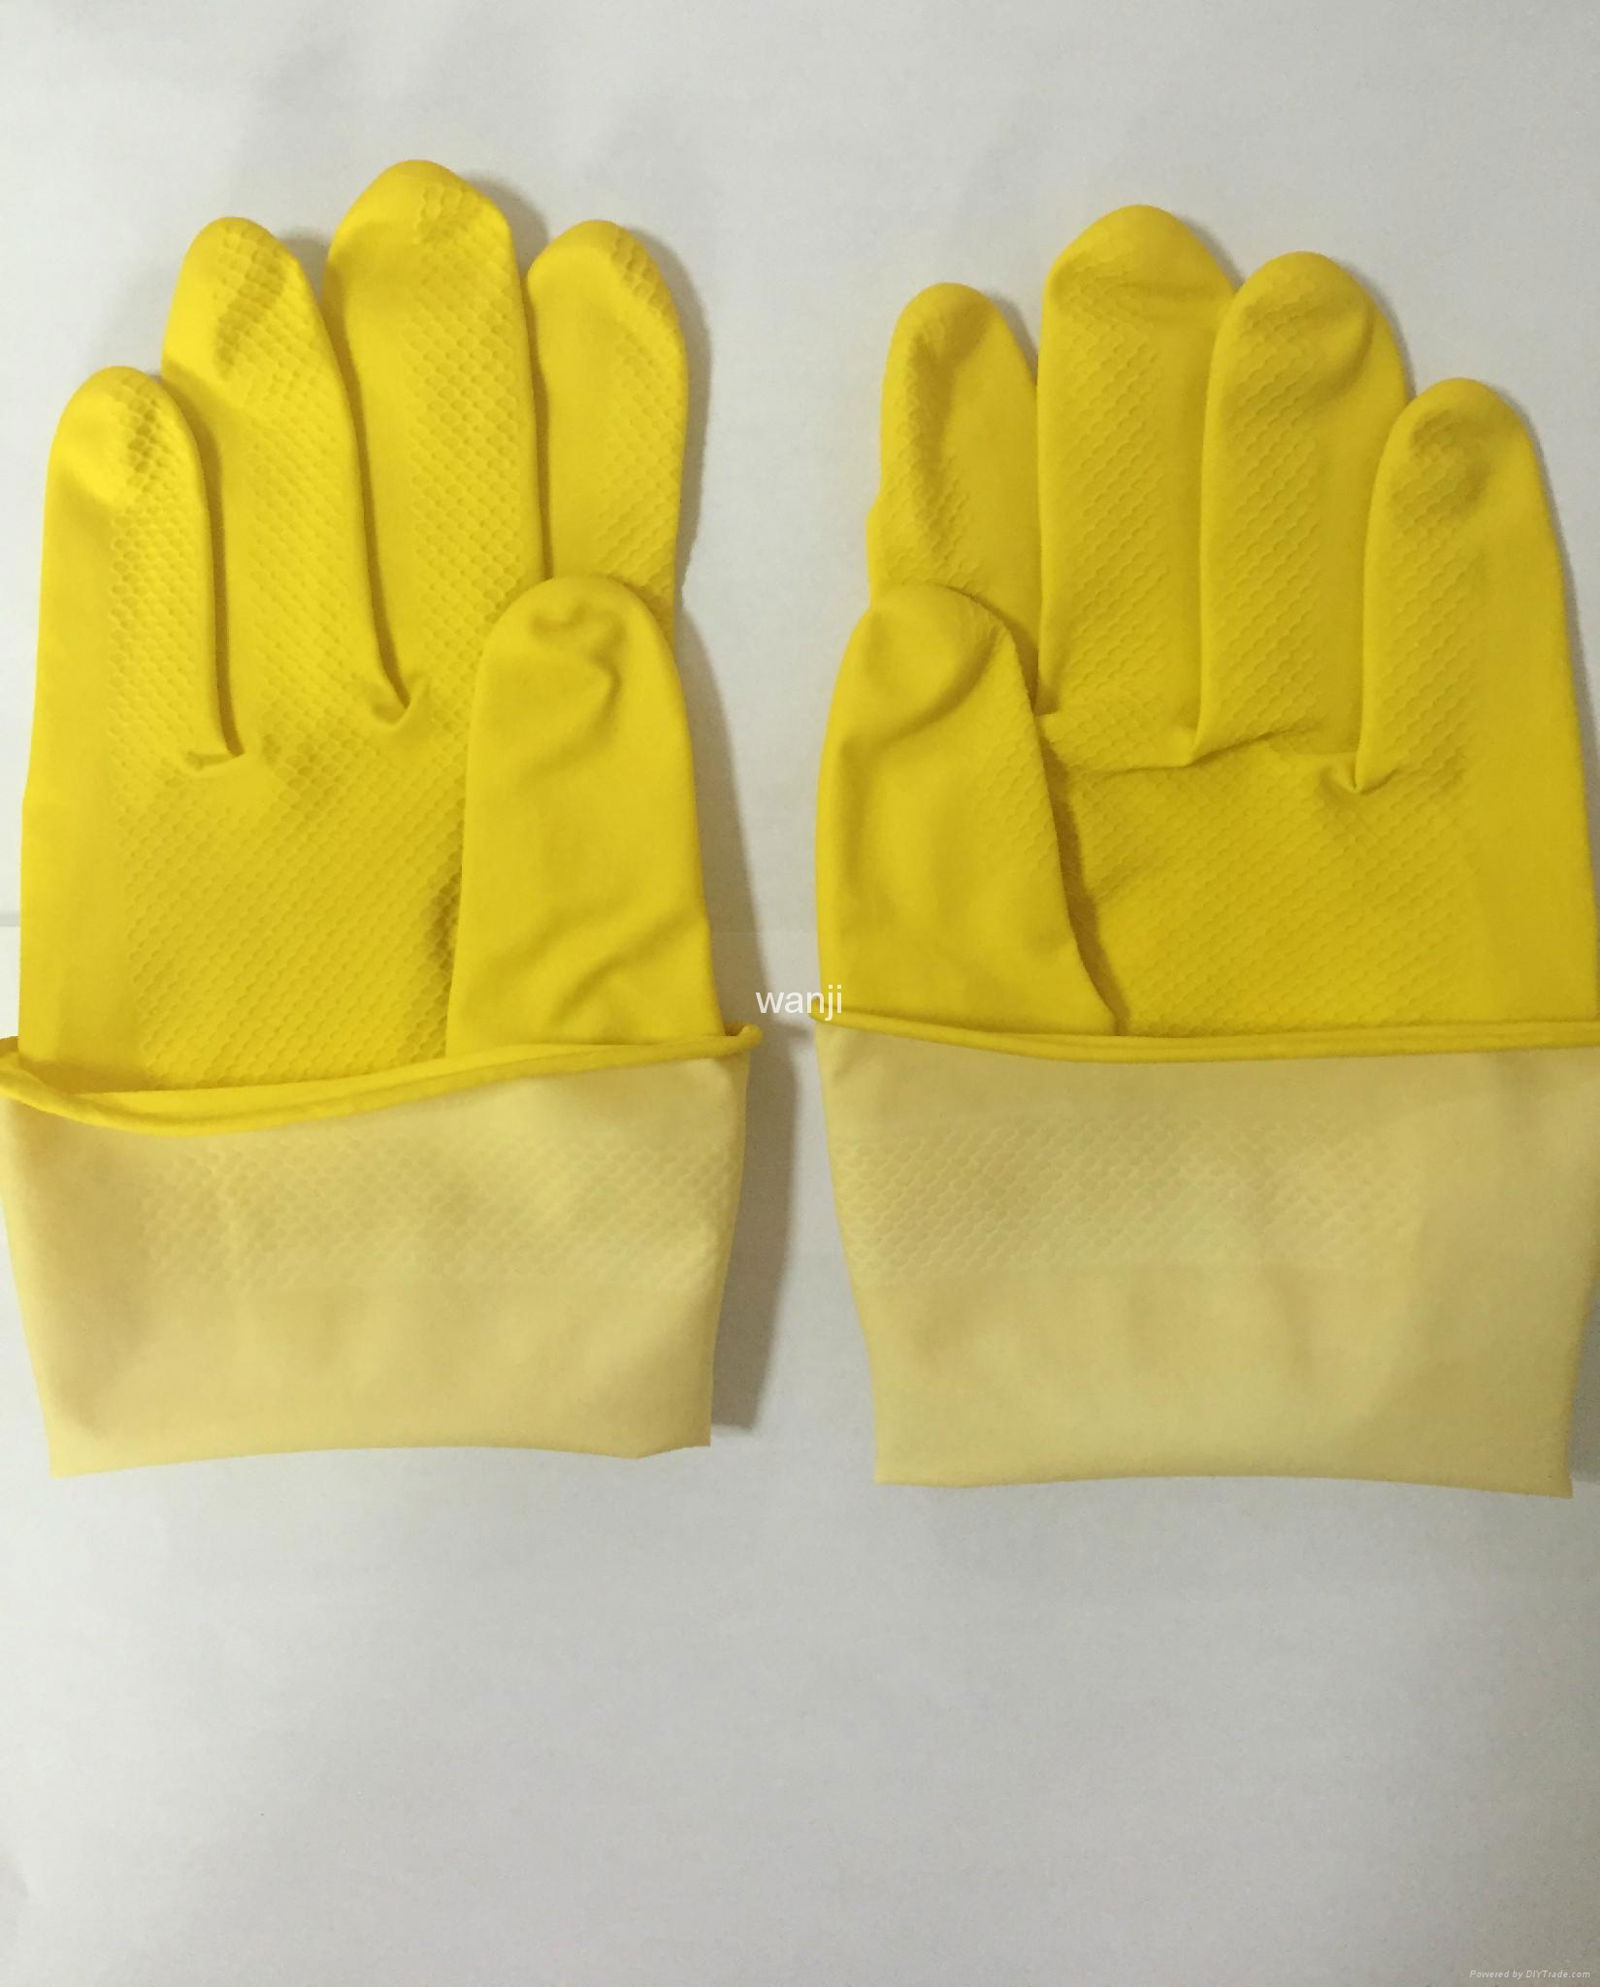 40G household latex gloves yellow colour 3